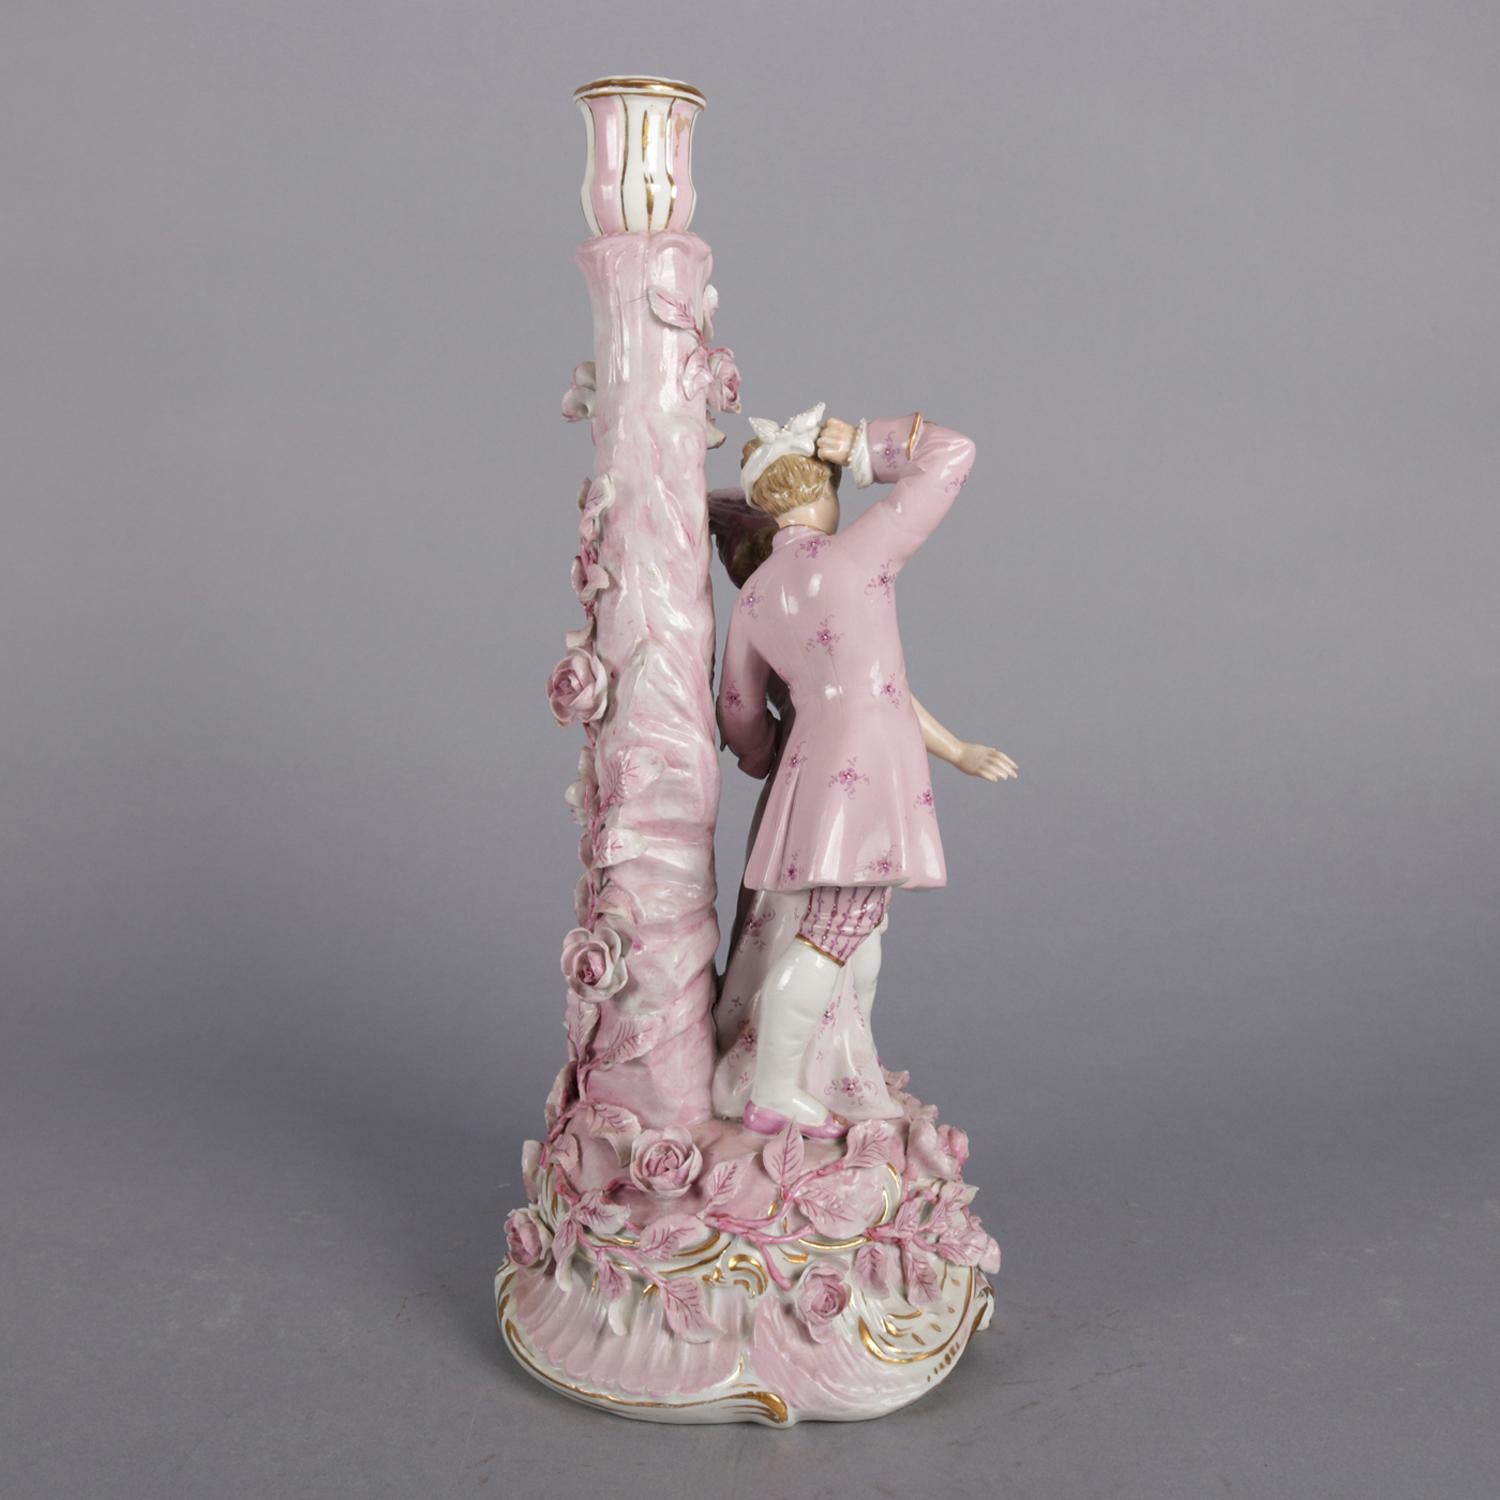 19th Century Antique German Meissen Hand-Painted and Gilt Figural Porcelain Candlestick